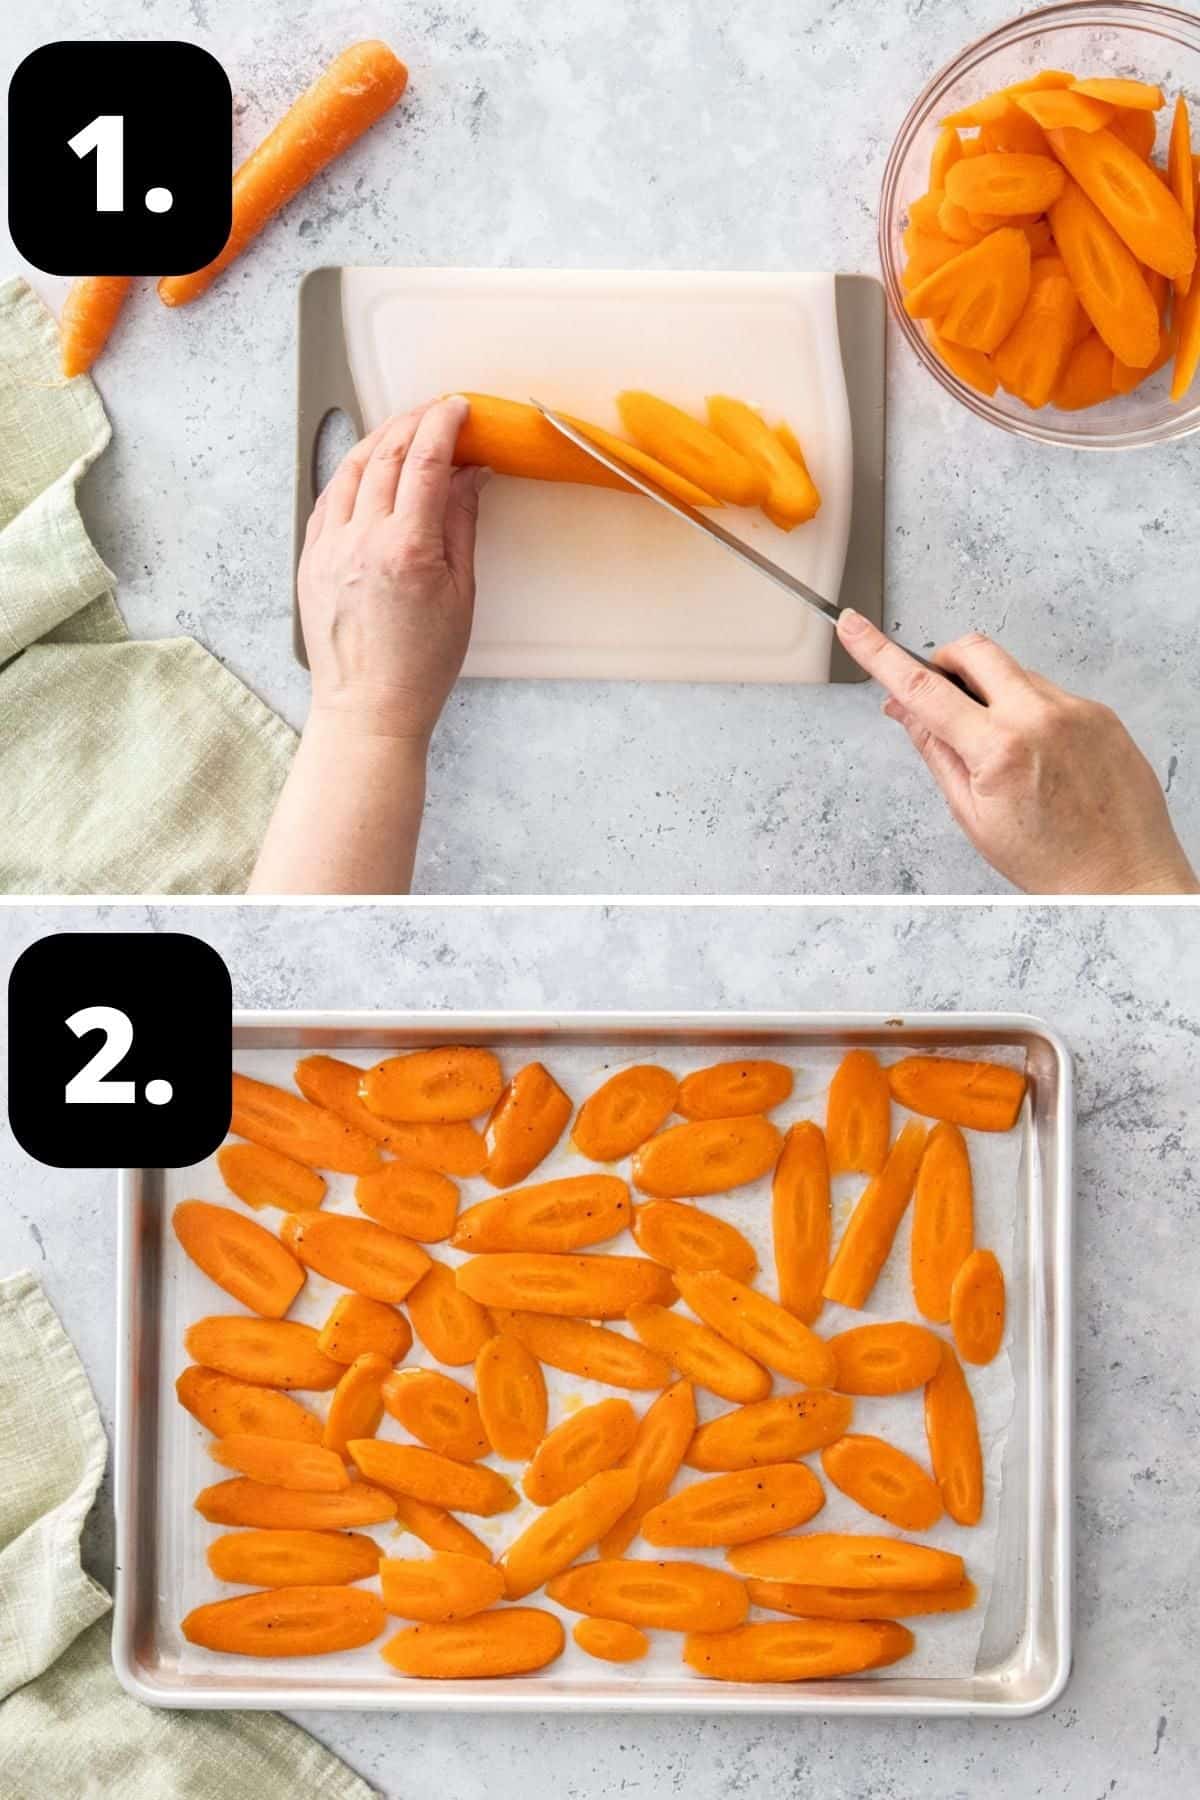 Steps 1-2 of preparing this recipe - slicing the carrots and the carrots on a baking tray ready to be roasted.